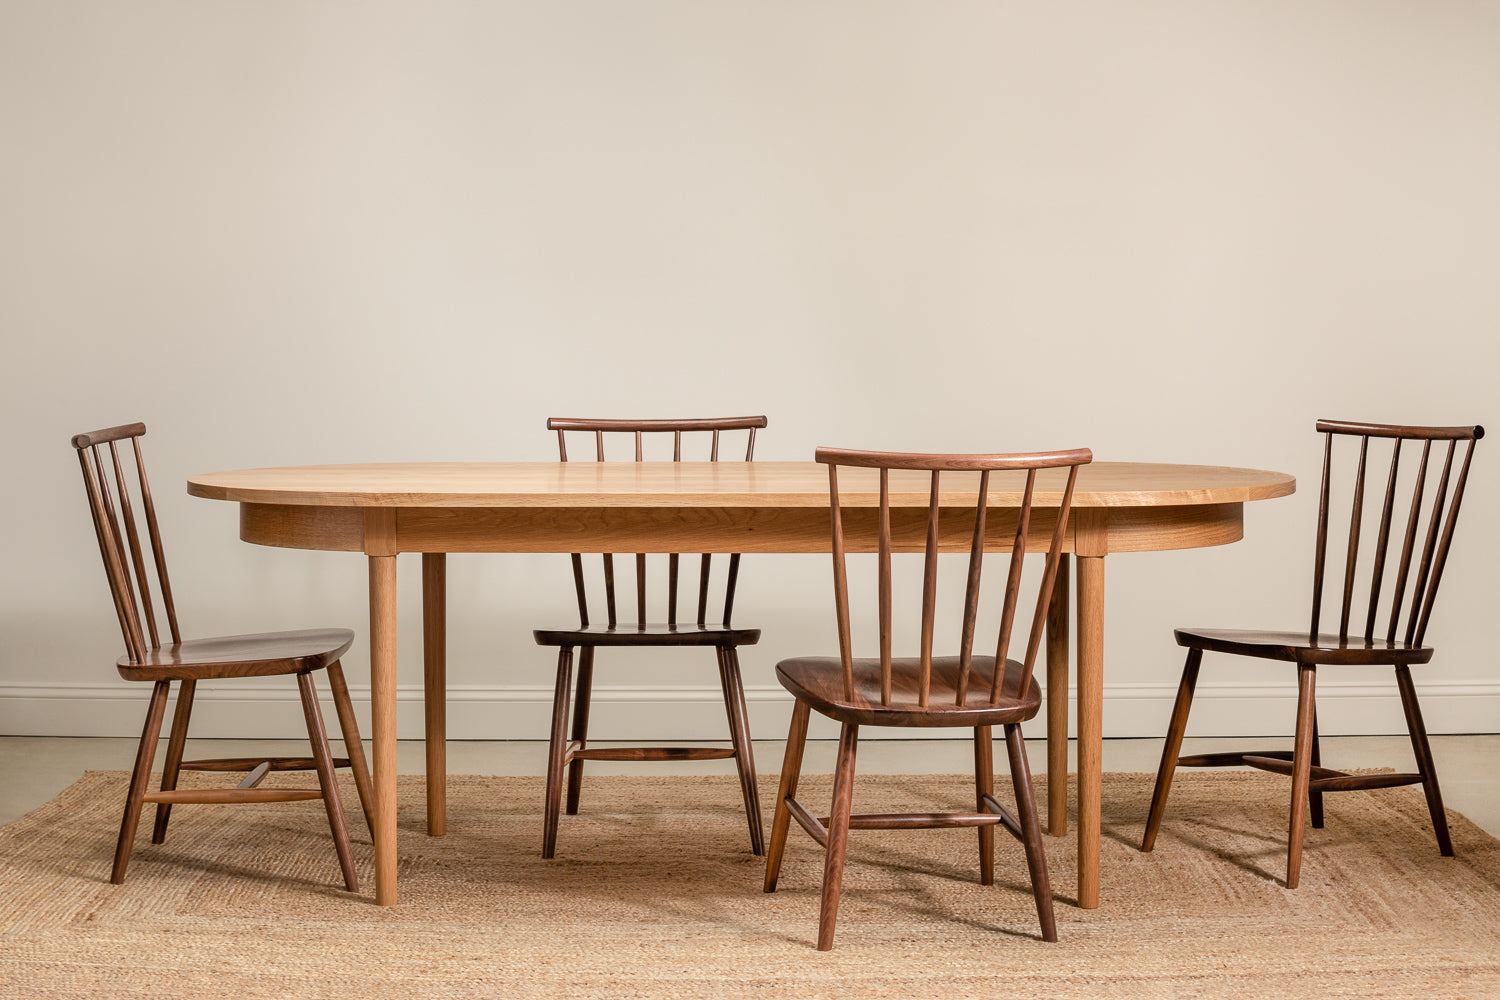 Walnut Concord chairs around white oak Highland Table from Chilton Furniture Co.